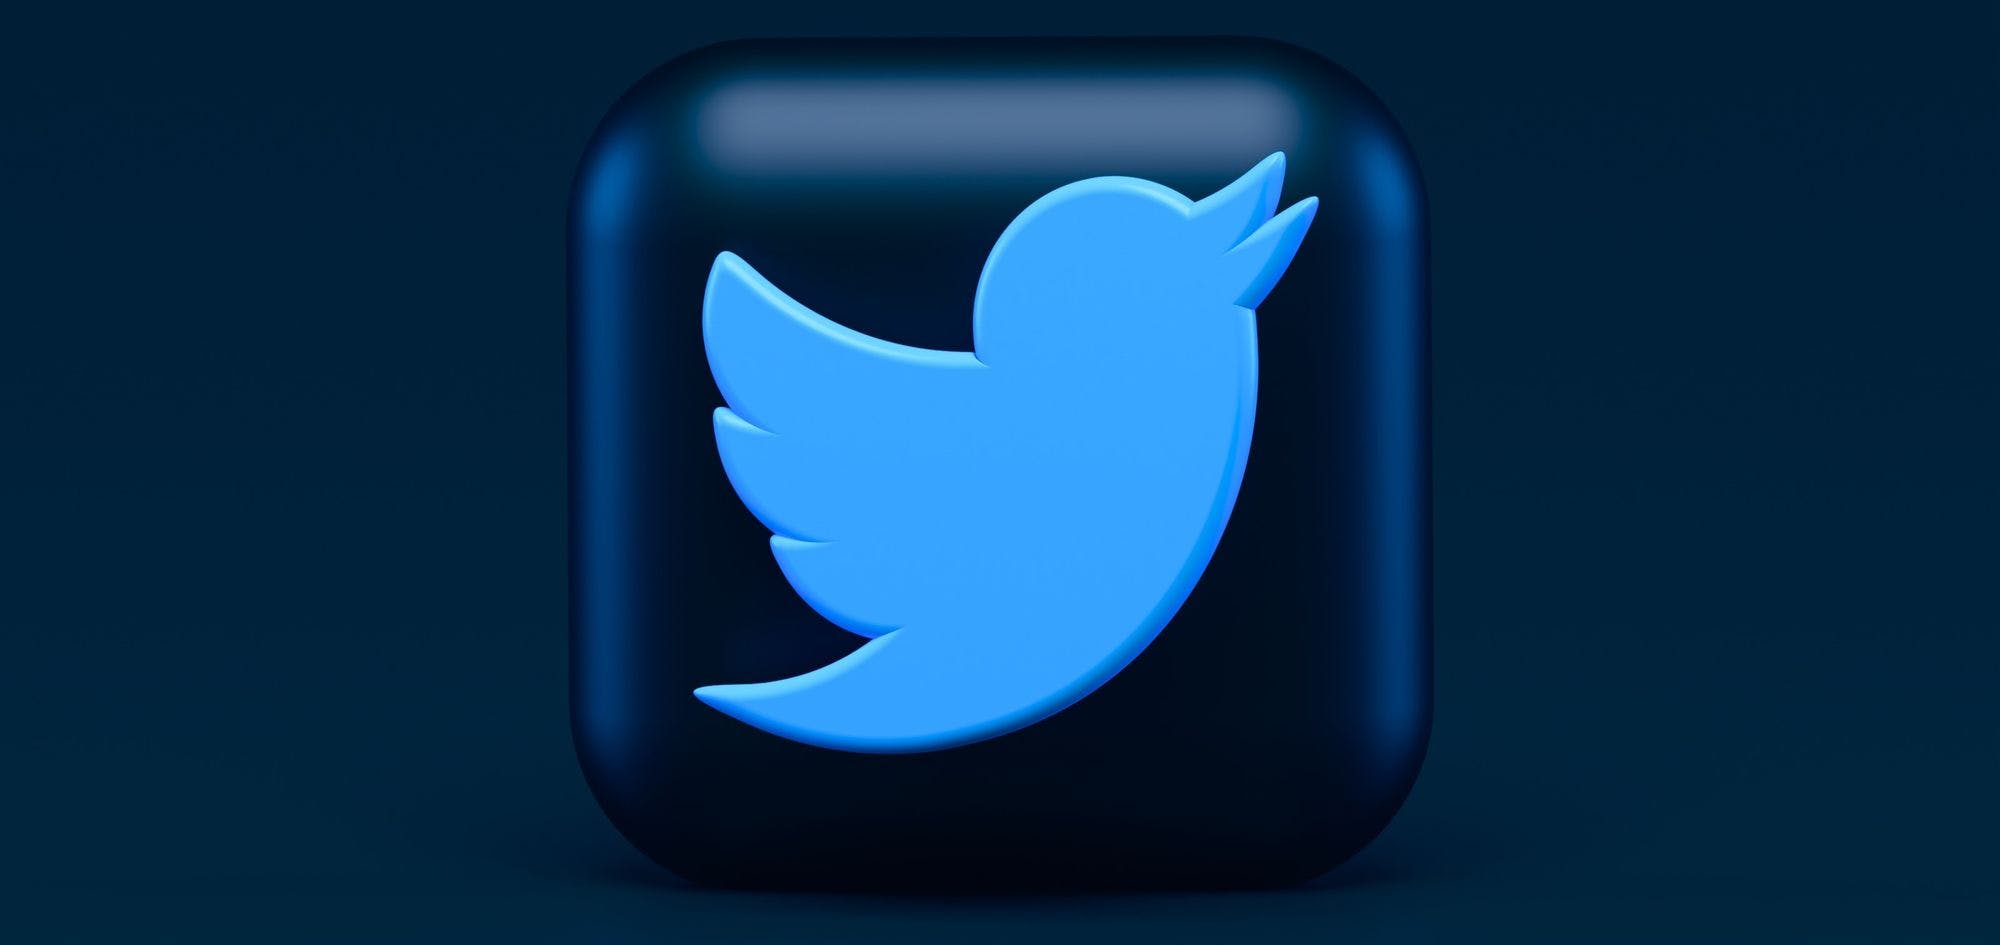 Get a Free Auto-Updating Twitter Backup in Just 60 Minutes